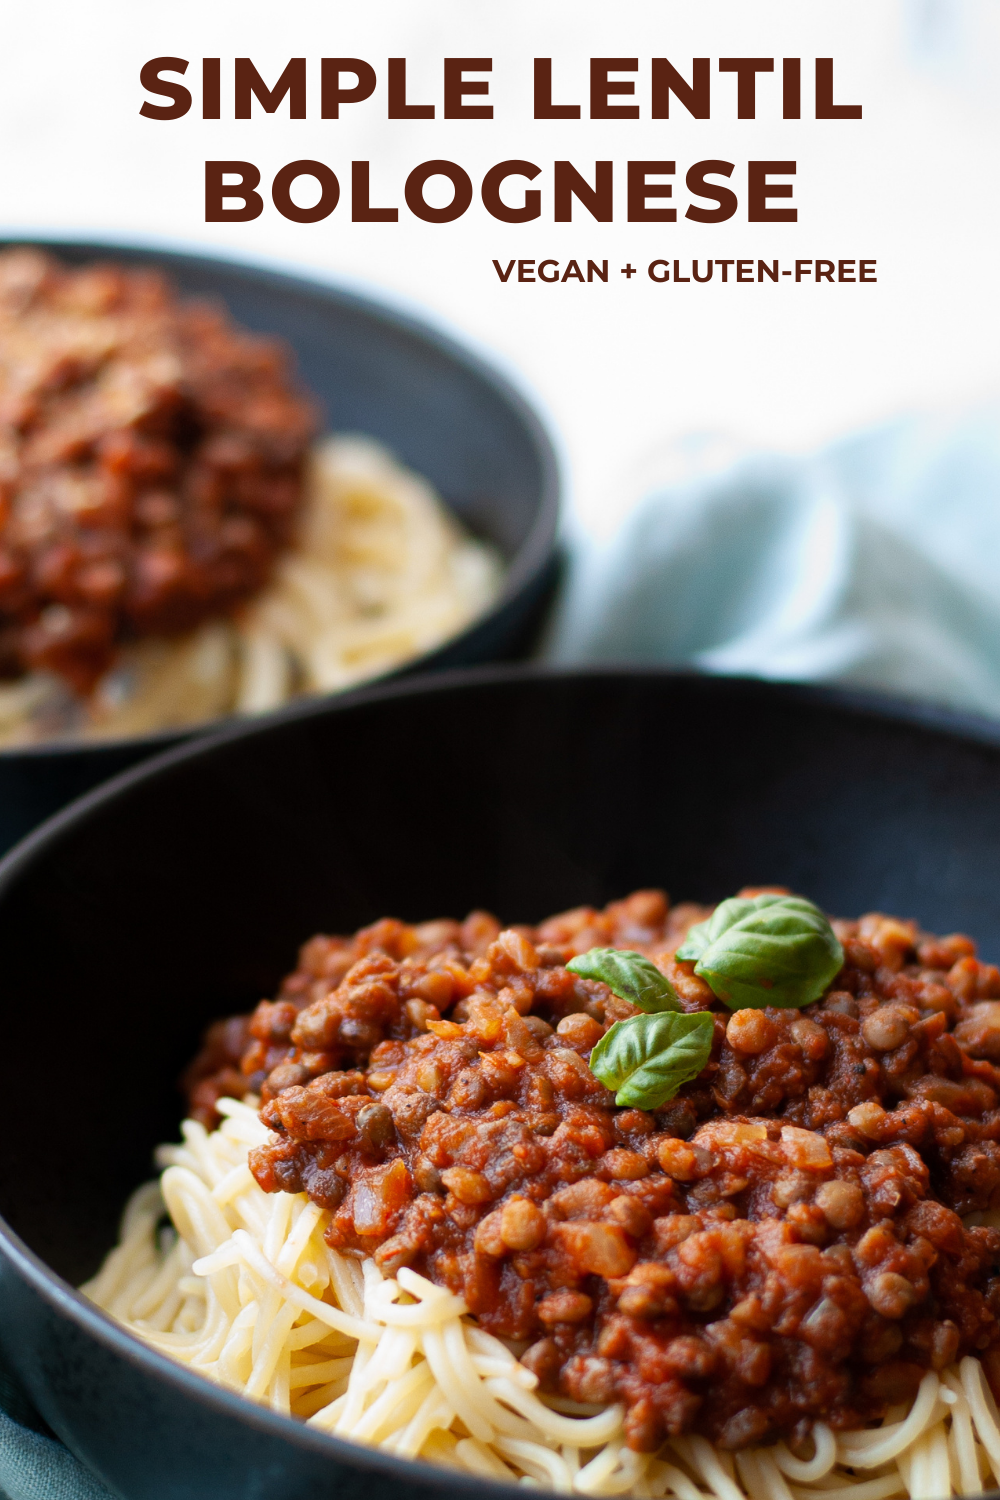 Simple Vegan Lentil Bolognese is the perfect quick weeknight meal for the whole family. It's gluten-free, comes together in under 30 minutes, and uses store-bought ingredients for an easy "dump & go" dinner!